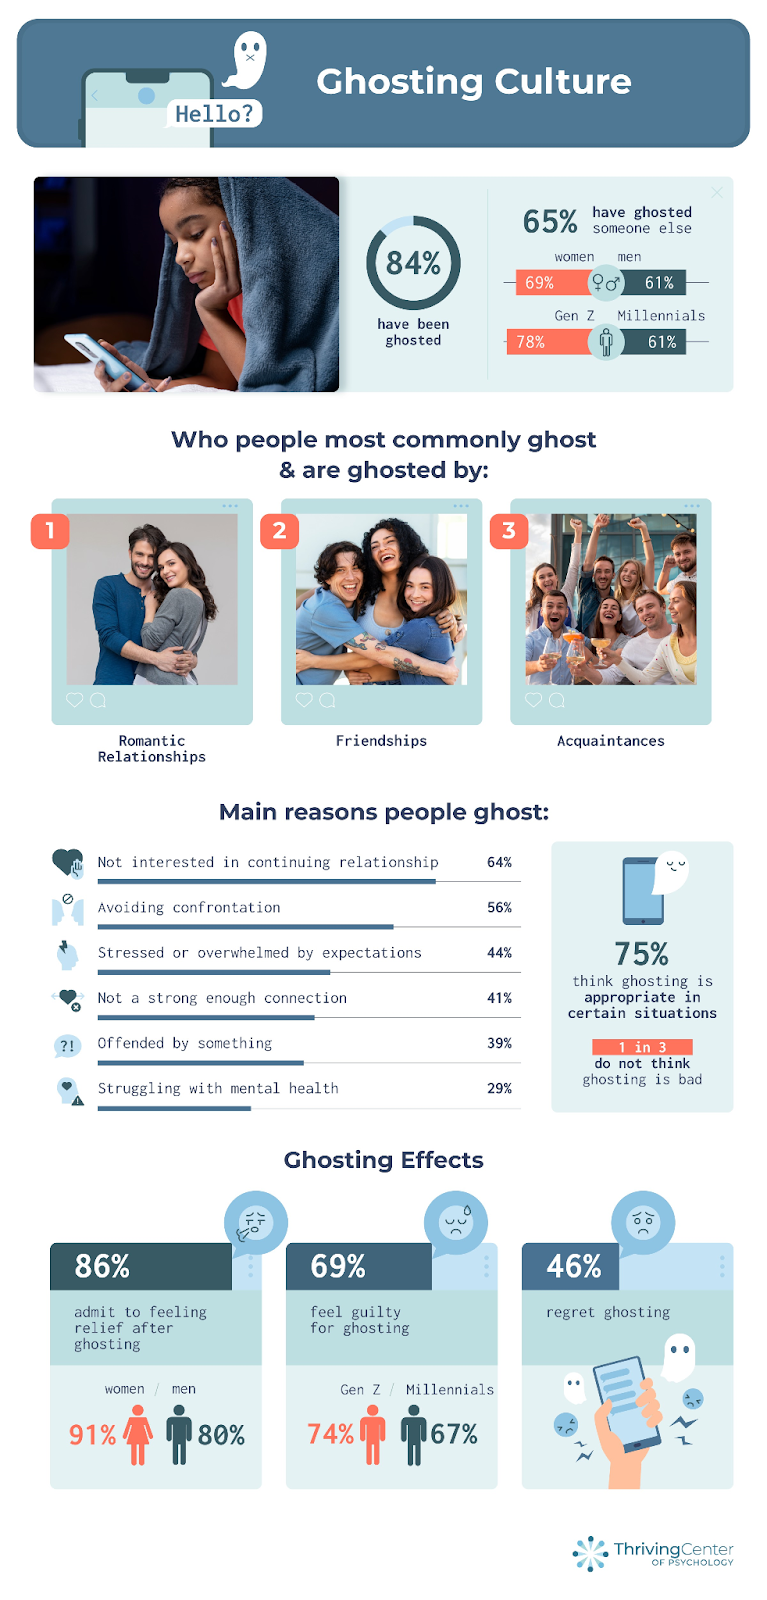 Top 6 Reasons People Ghost - report and infographic by thrivingcenterofpsych.com